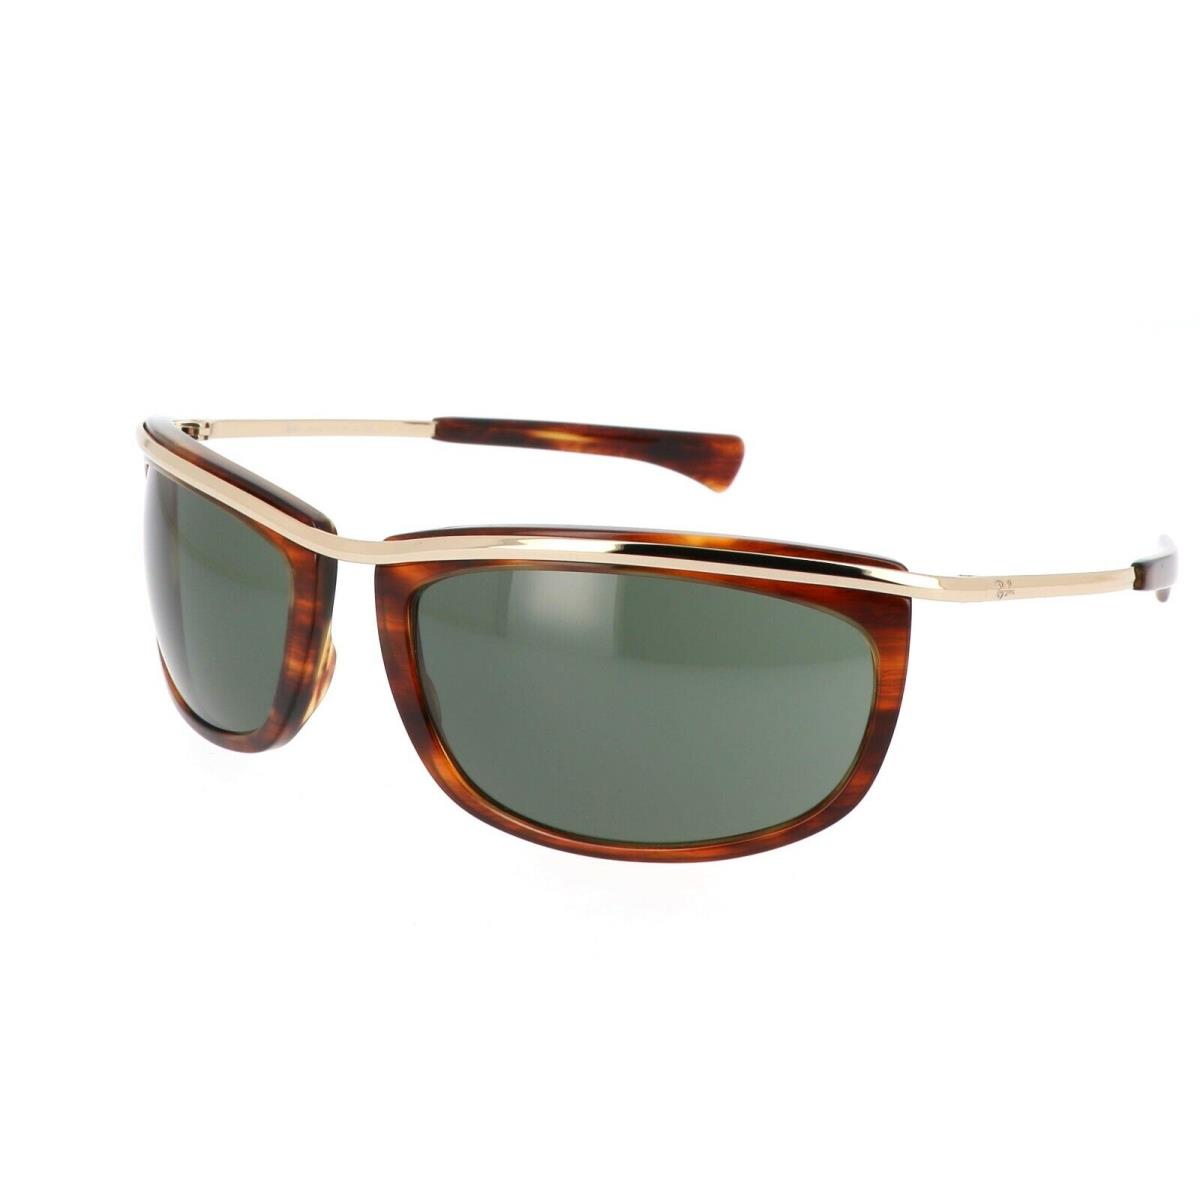 Ray-ban Olympian Tortoise Gold Sunglasses RB2319 954/31 62 / RB2319954/31-62 - Brown Frame, Green Lens